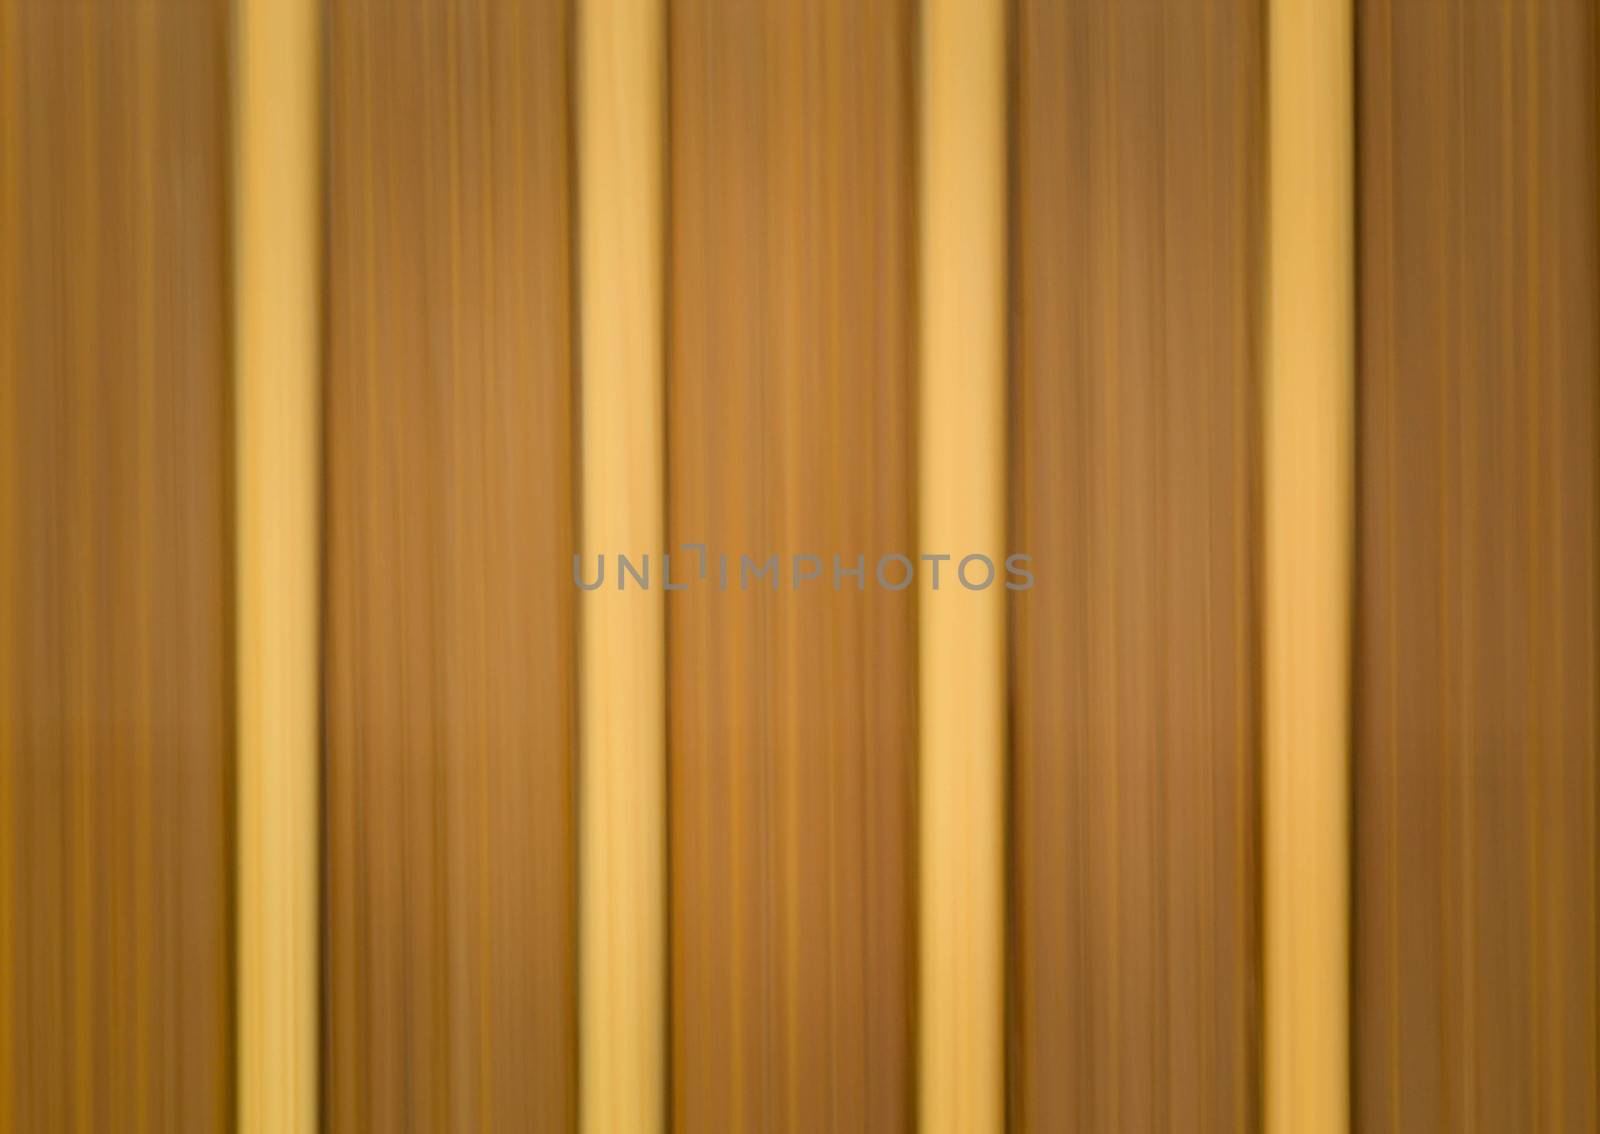 abstract background or texture blurred wooden slats brown color